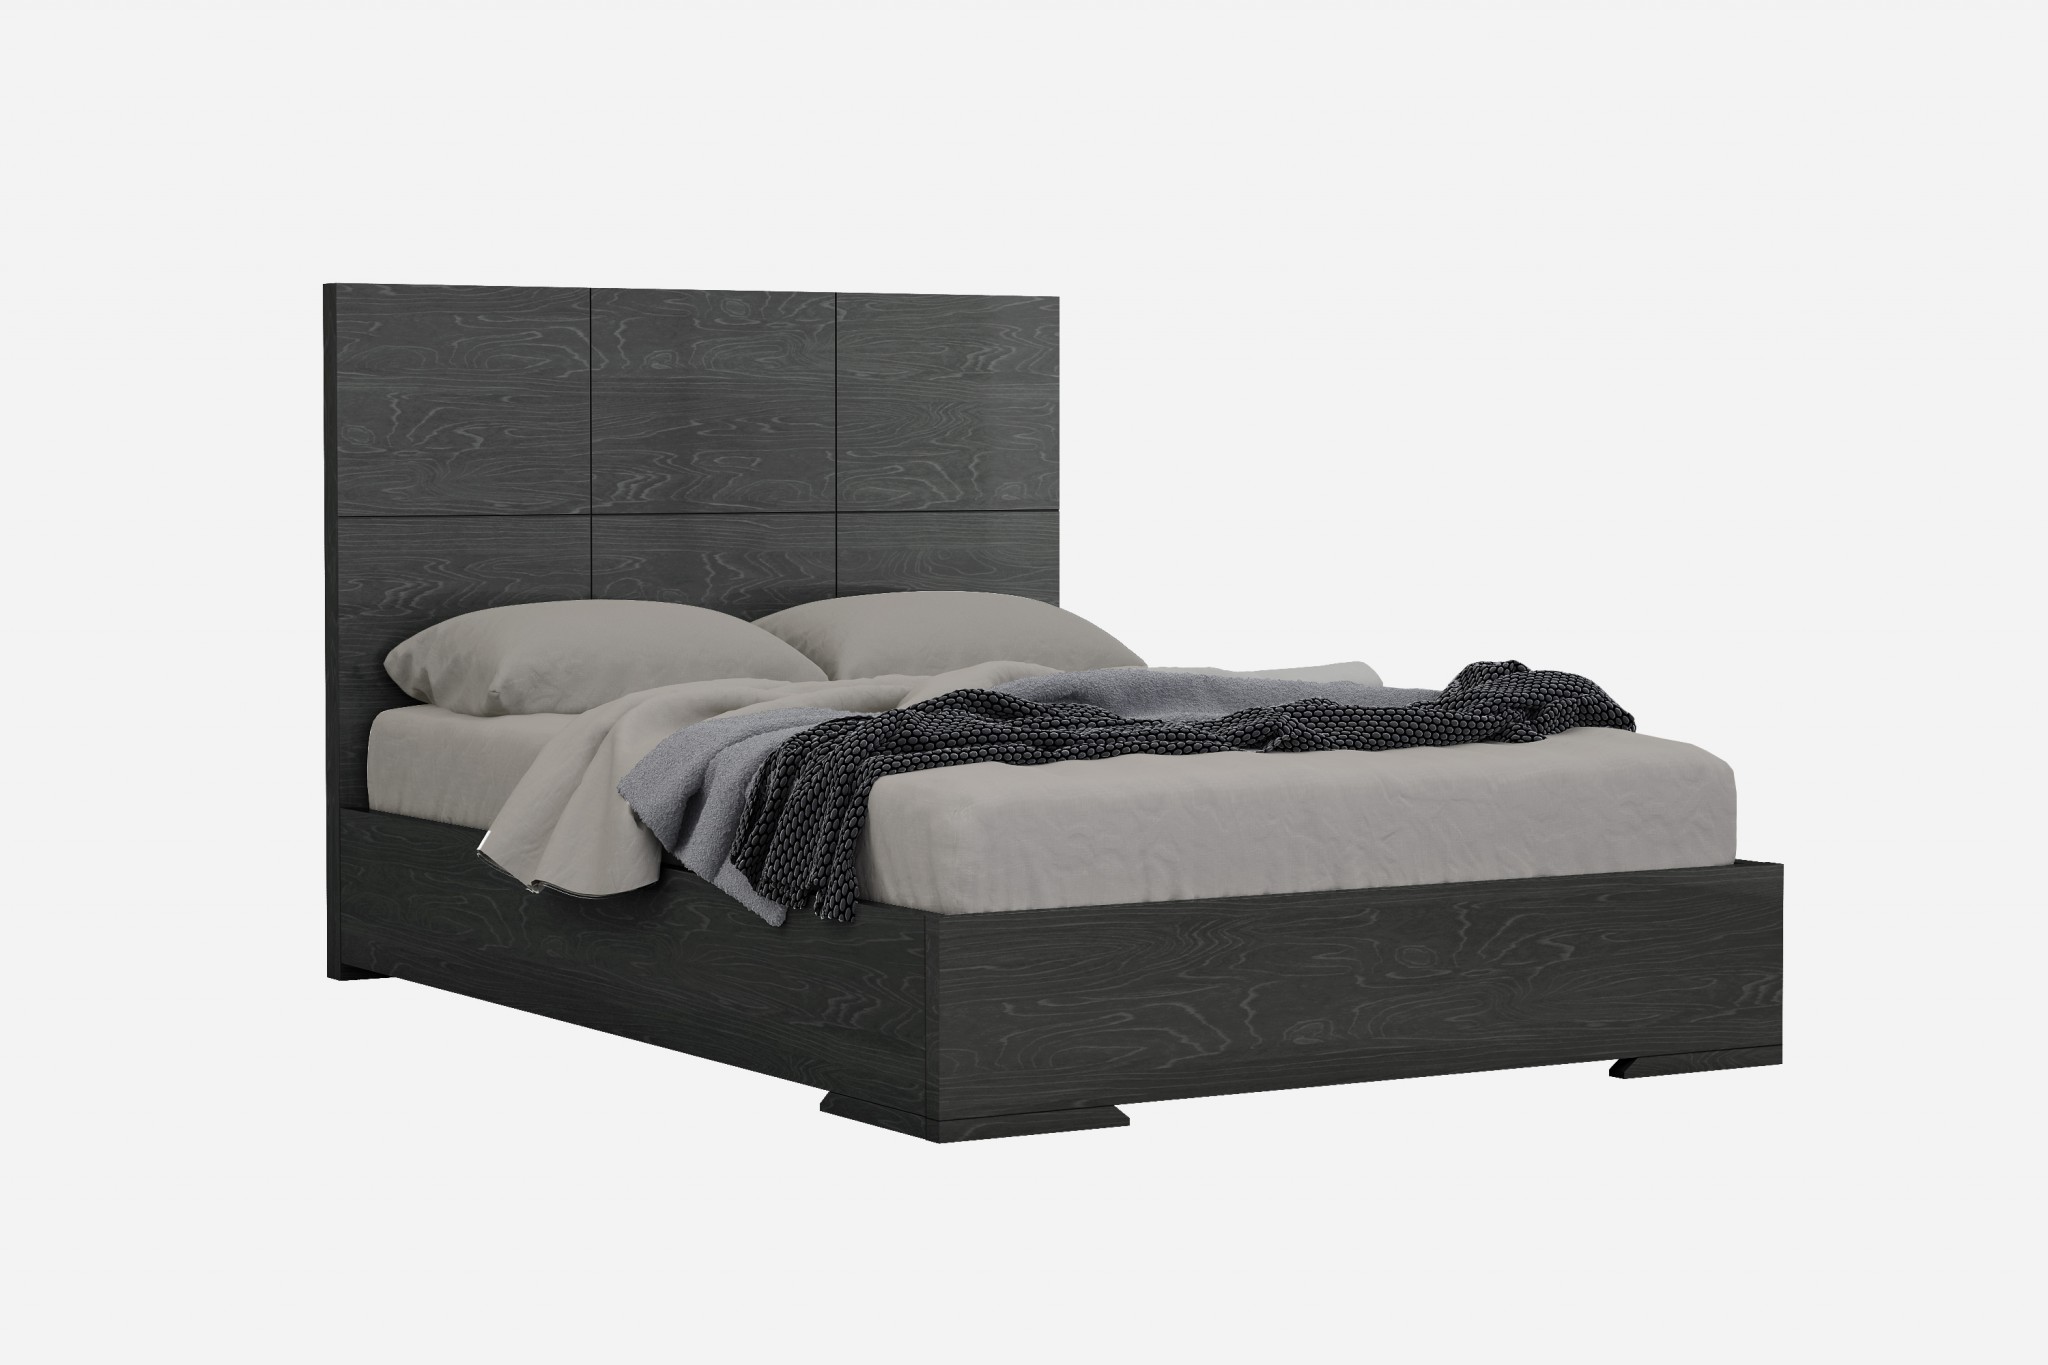 57" X 79" X 48" Gray Stainless Steel King Bed